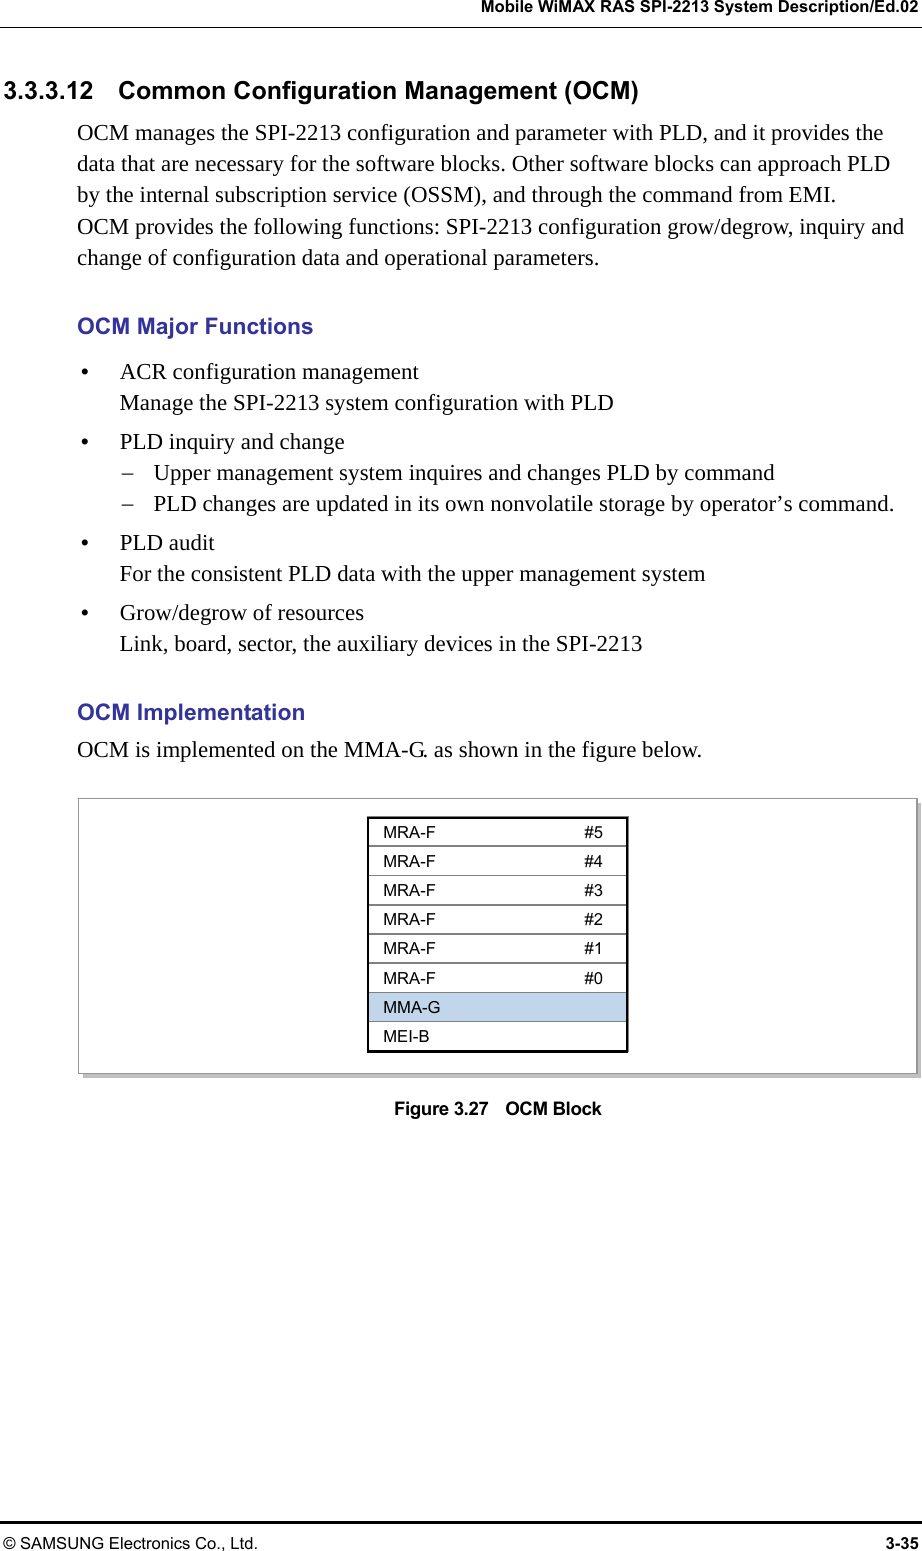   Mobile WiMAX RAS SPI-2213 System Description/Ed.02 © SAMSUNG Electronics Co., Ltd.  3-35 3.3.3.12    Common Configuration Management (OCM) OCM manages the SPI-2213 configuration and parameter with PLD, and it provides the data that are necessary for the software blocks. Other software blocks can approach PLD by the internal subscription service (OSSM), and through the command from EMI.   OCM provides the following functions: SPI-2213 configuration grow/degrow, inquiry and change of configuration data and operational parameters.  OCM Major Functions y ACR configuration management Manage the SPI-2213 system configuration with PLD y PLD inquiry and change − Upper management system inquires and changes PLD by command − PLD changes are updated in its own nonvolatile storage by operator’s command. y PLD audit For the consistent PLD data with the upper management system y Grow/degrow of resources Link, board, sector, the auxiliary devices in the SPI-2213  OCM Implementation OCM is implemented on the MMA-G. as shown in the figure below.  Figure 3.27    OCM Block  MRA-F #5 MRA-F #4 MRA-F #3 MRA-F #2 MRA-F #1 MRA-F #0 MMA-G MEI-B